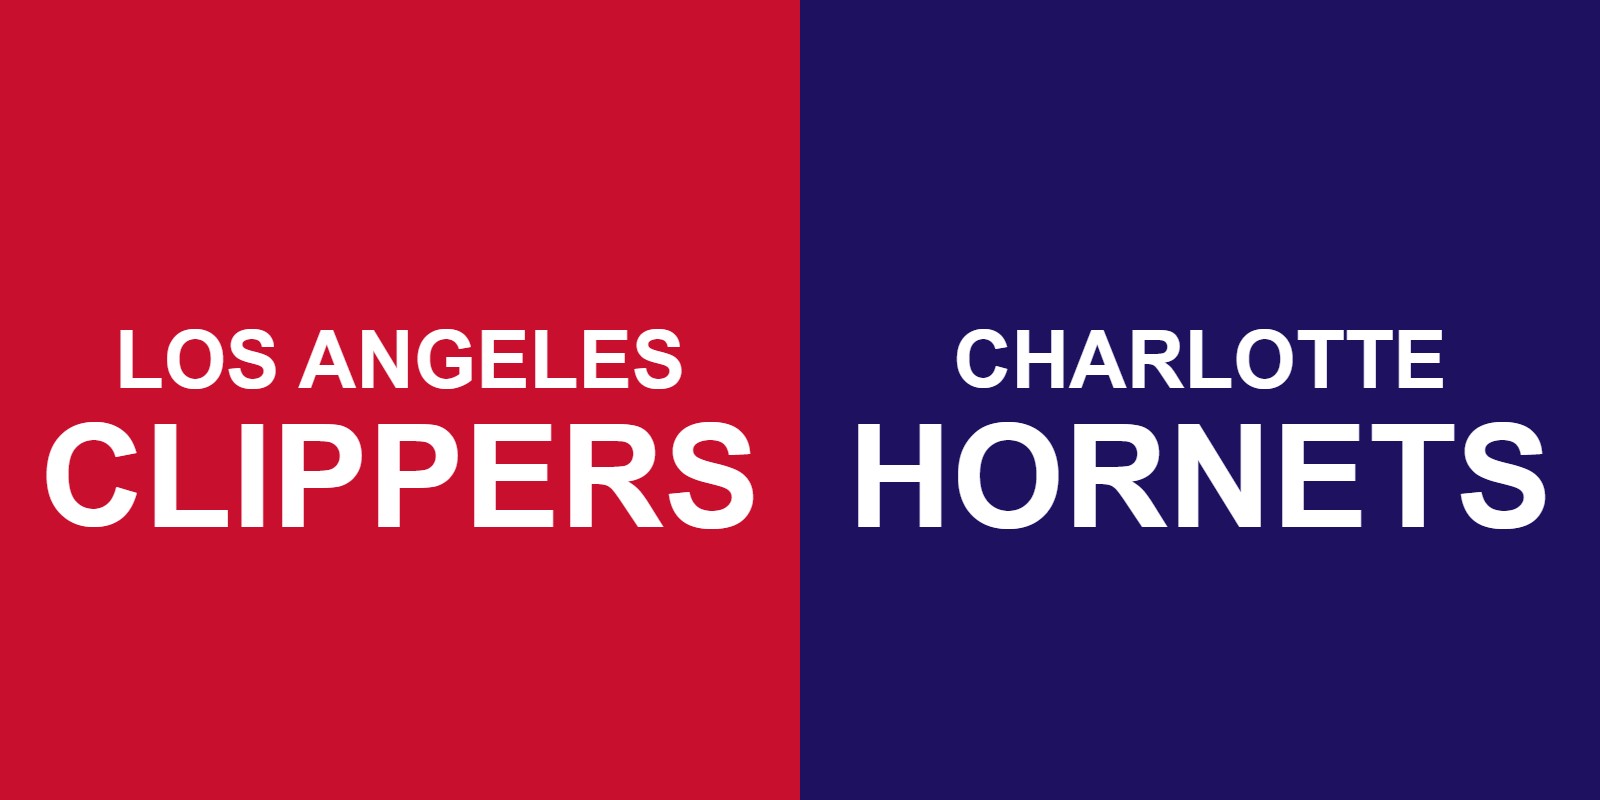 Clippers vs Hornets